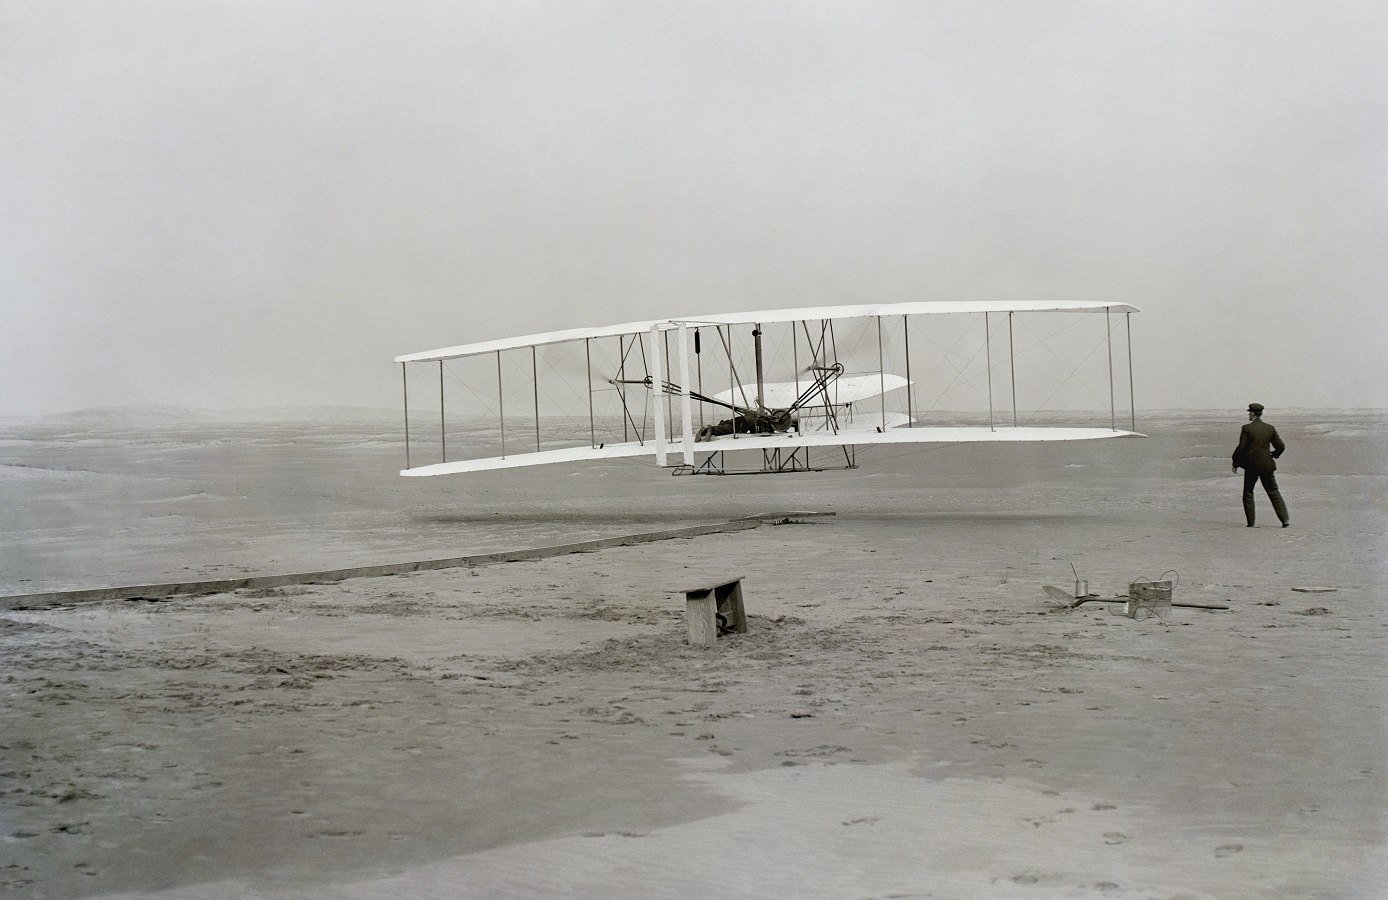 The historic photo captured by John T. Daniels of the Wright Brothers powered first flight - First Flight: the Wright Brothers